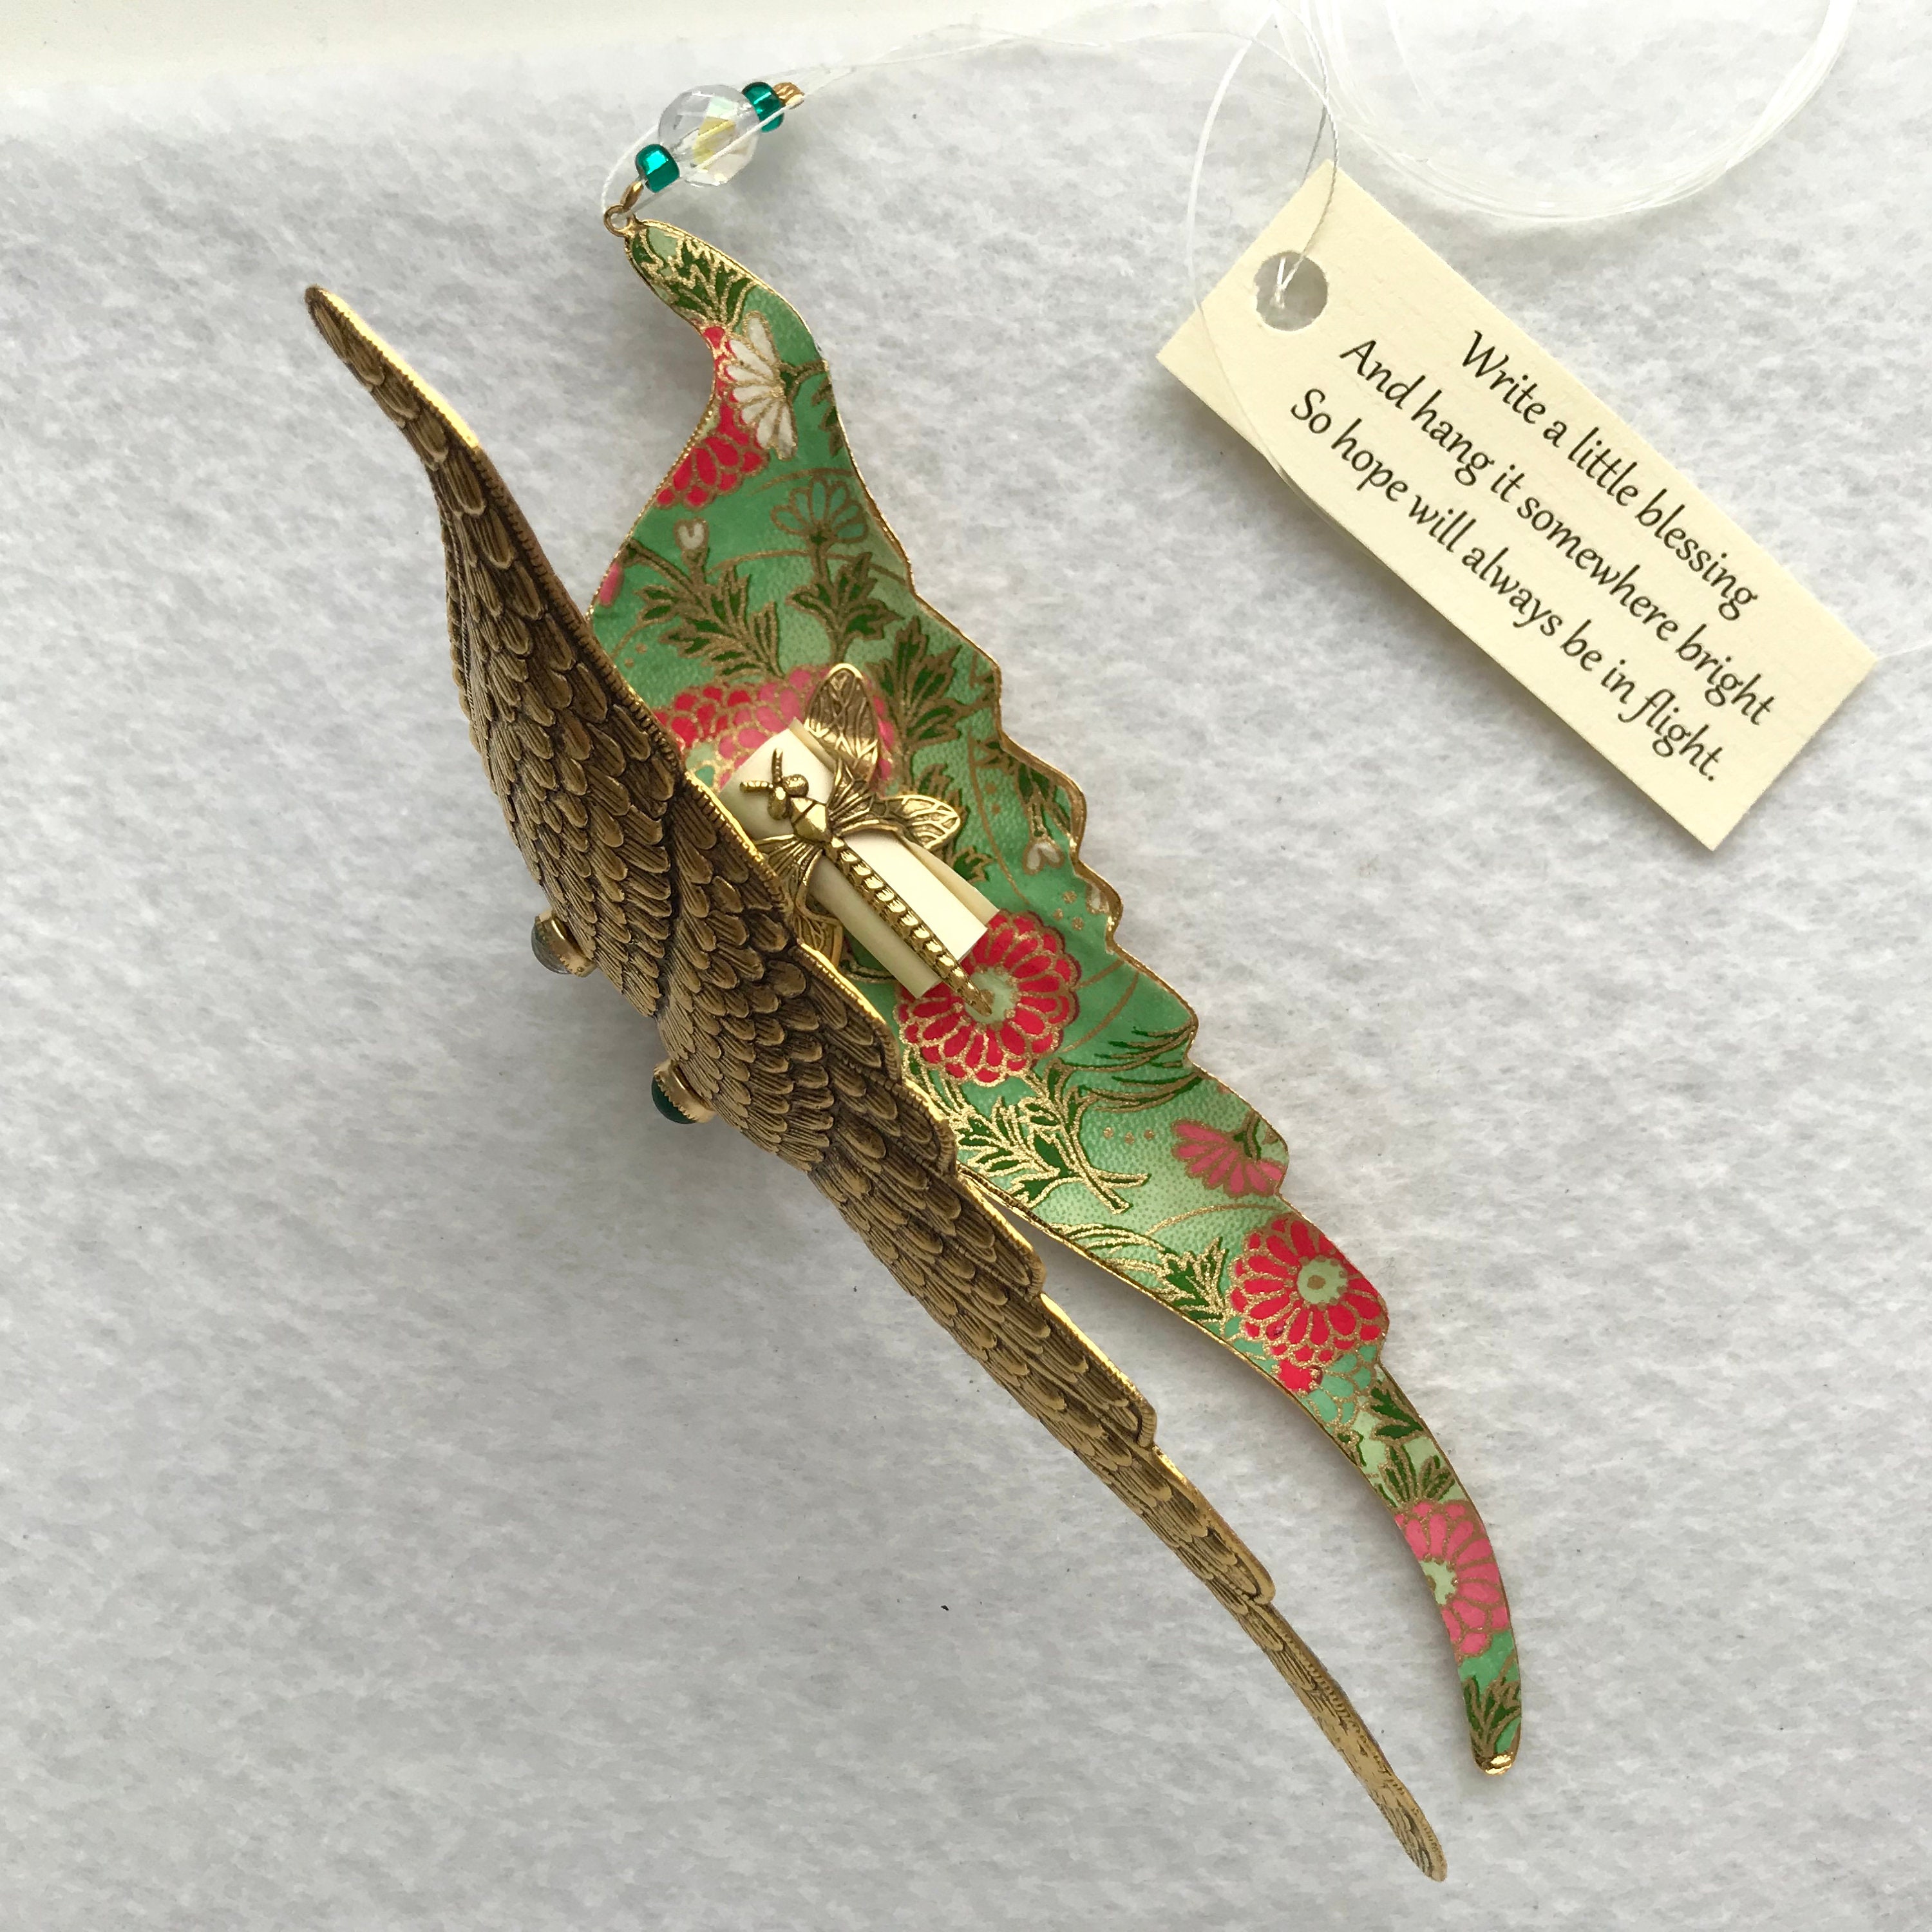 Lined with Chiyogami paper Personalize by writing a message inside on removable scroll. Folding Wings Hanging Ornament Antique Silver